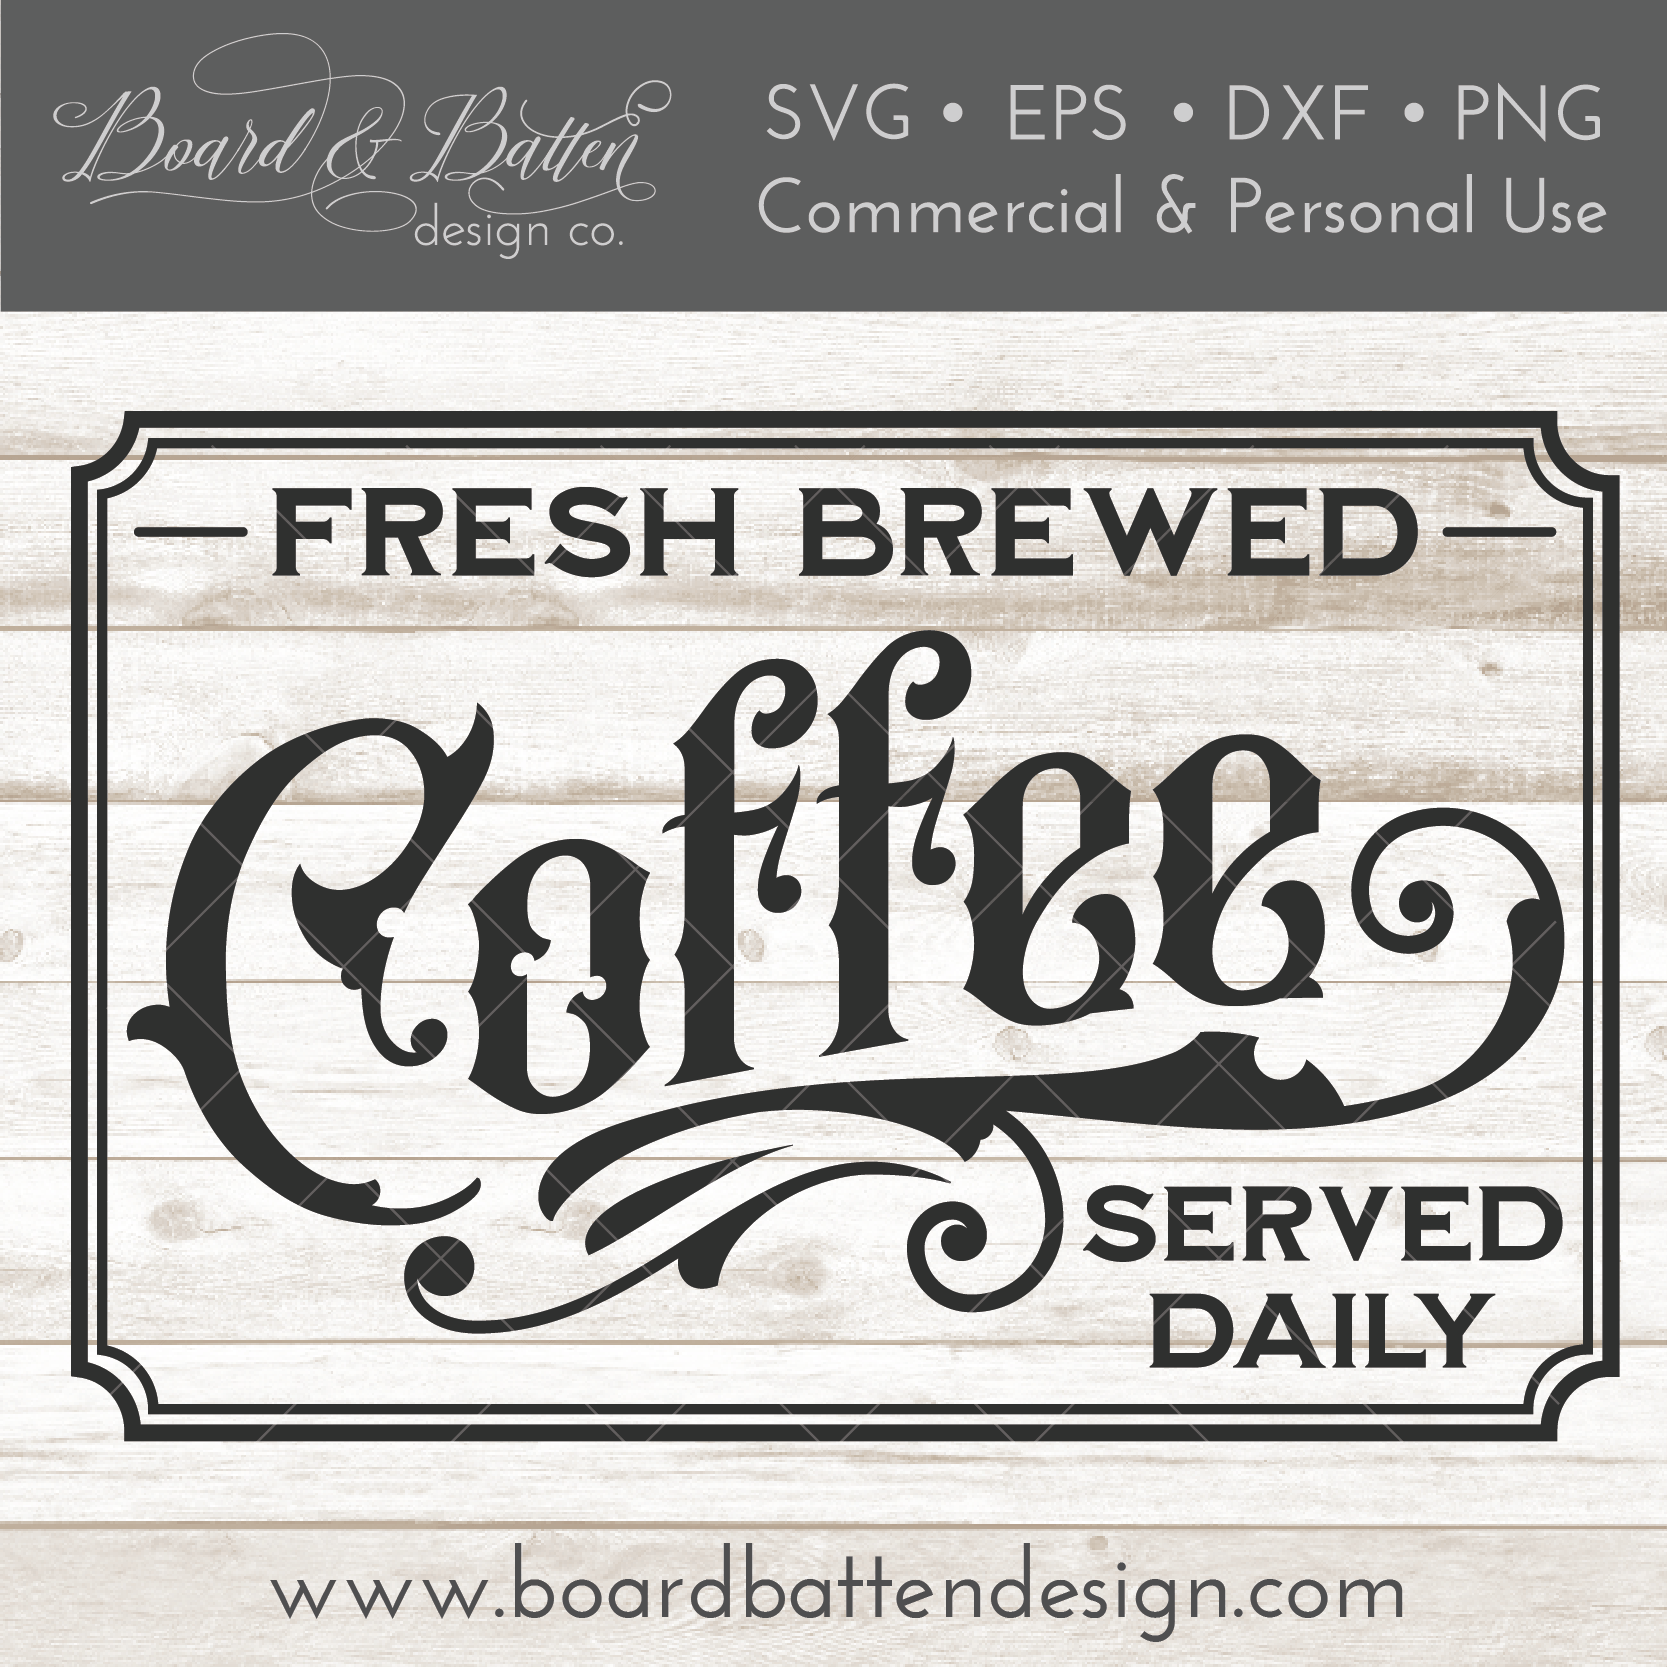 fresh-brewed-coffee-served-daily-svg-file-board-batten-design-co